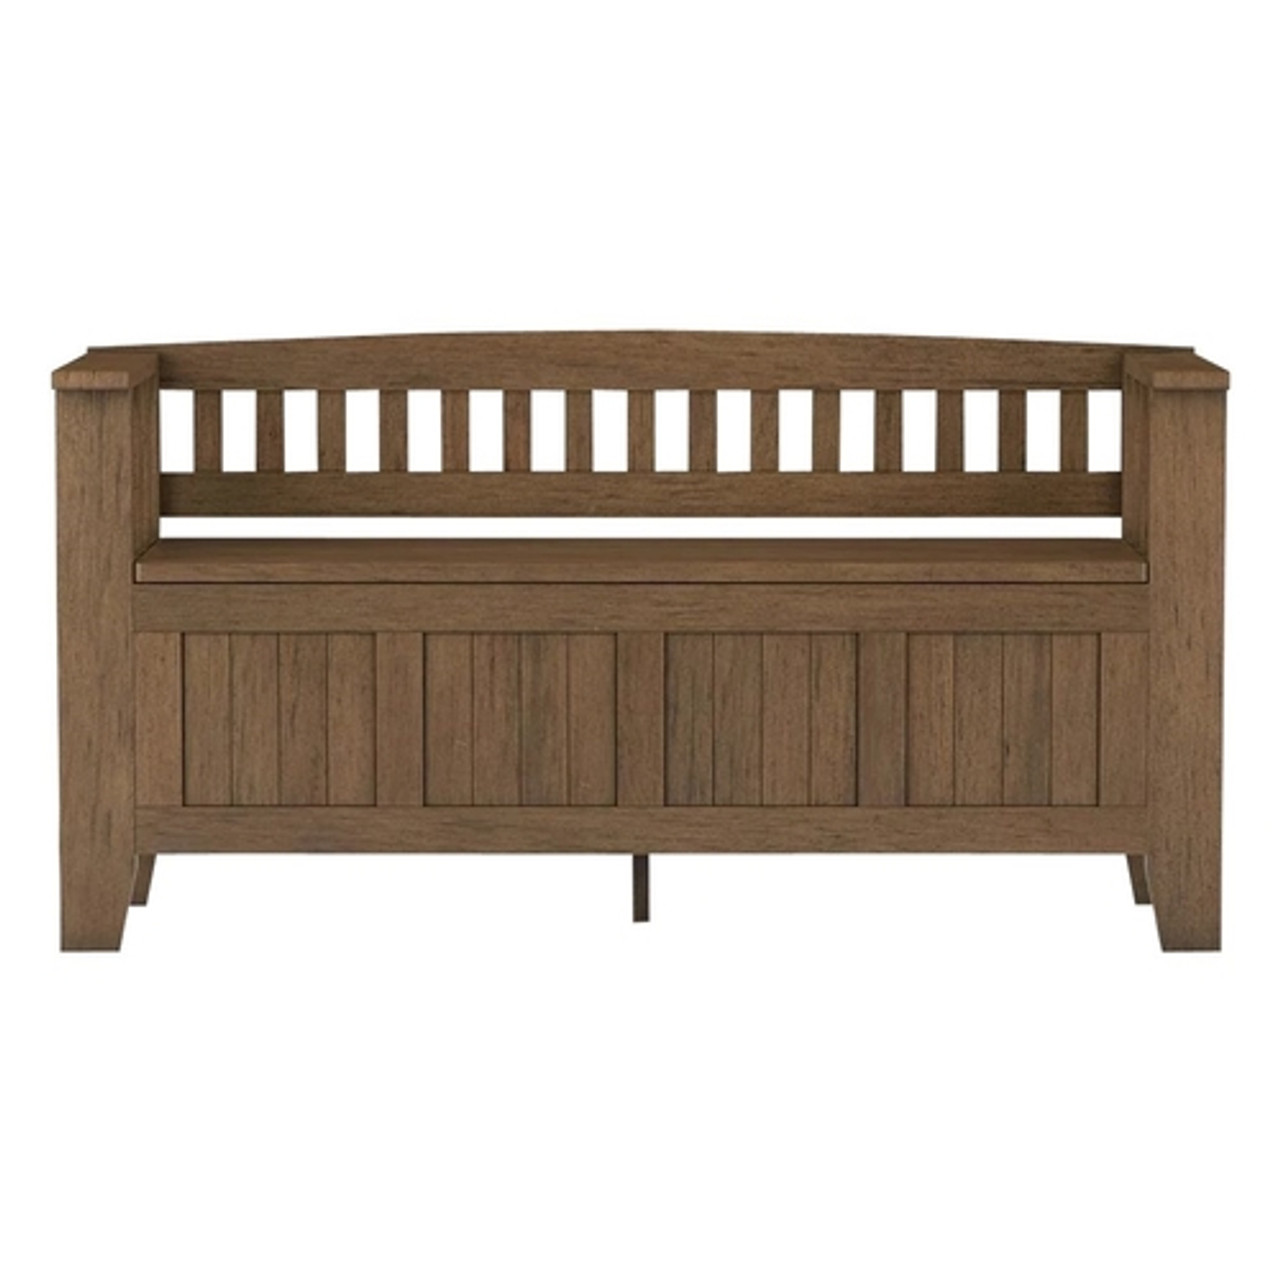 Simpli Home - Acadian Entryway Storage Bench With Backrest - Rustic Natural Aged Brown